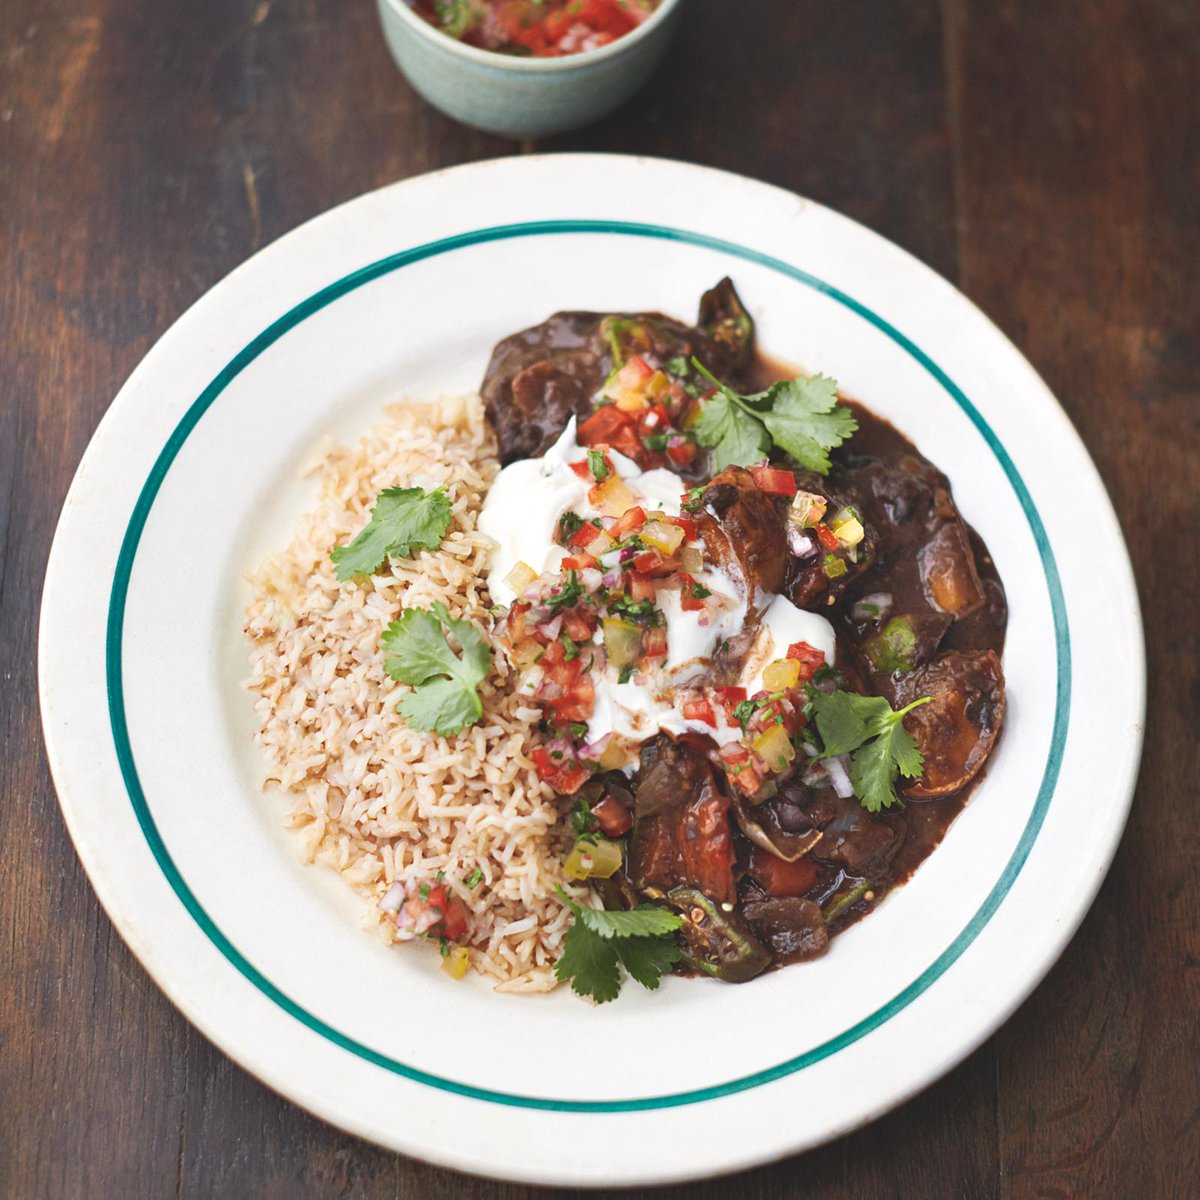 Beautiful black bean stew with all the trimmings http://t.co/hy5BsP1OPx #JamiesSuperFood http://t.co/qzfa1wUCTP